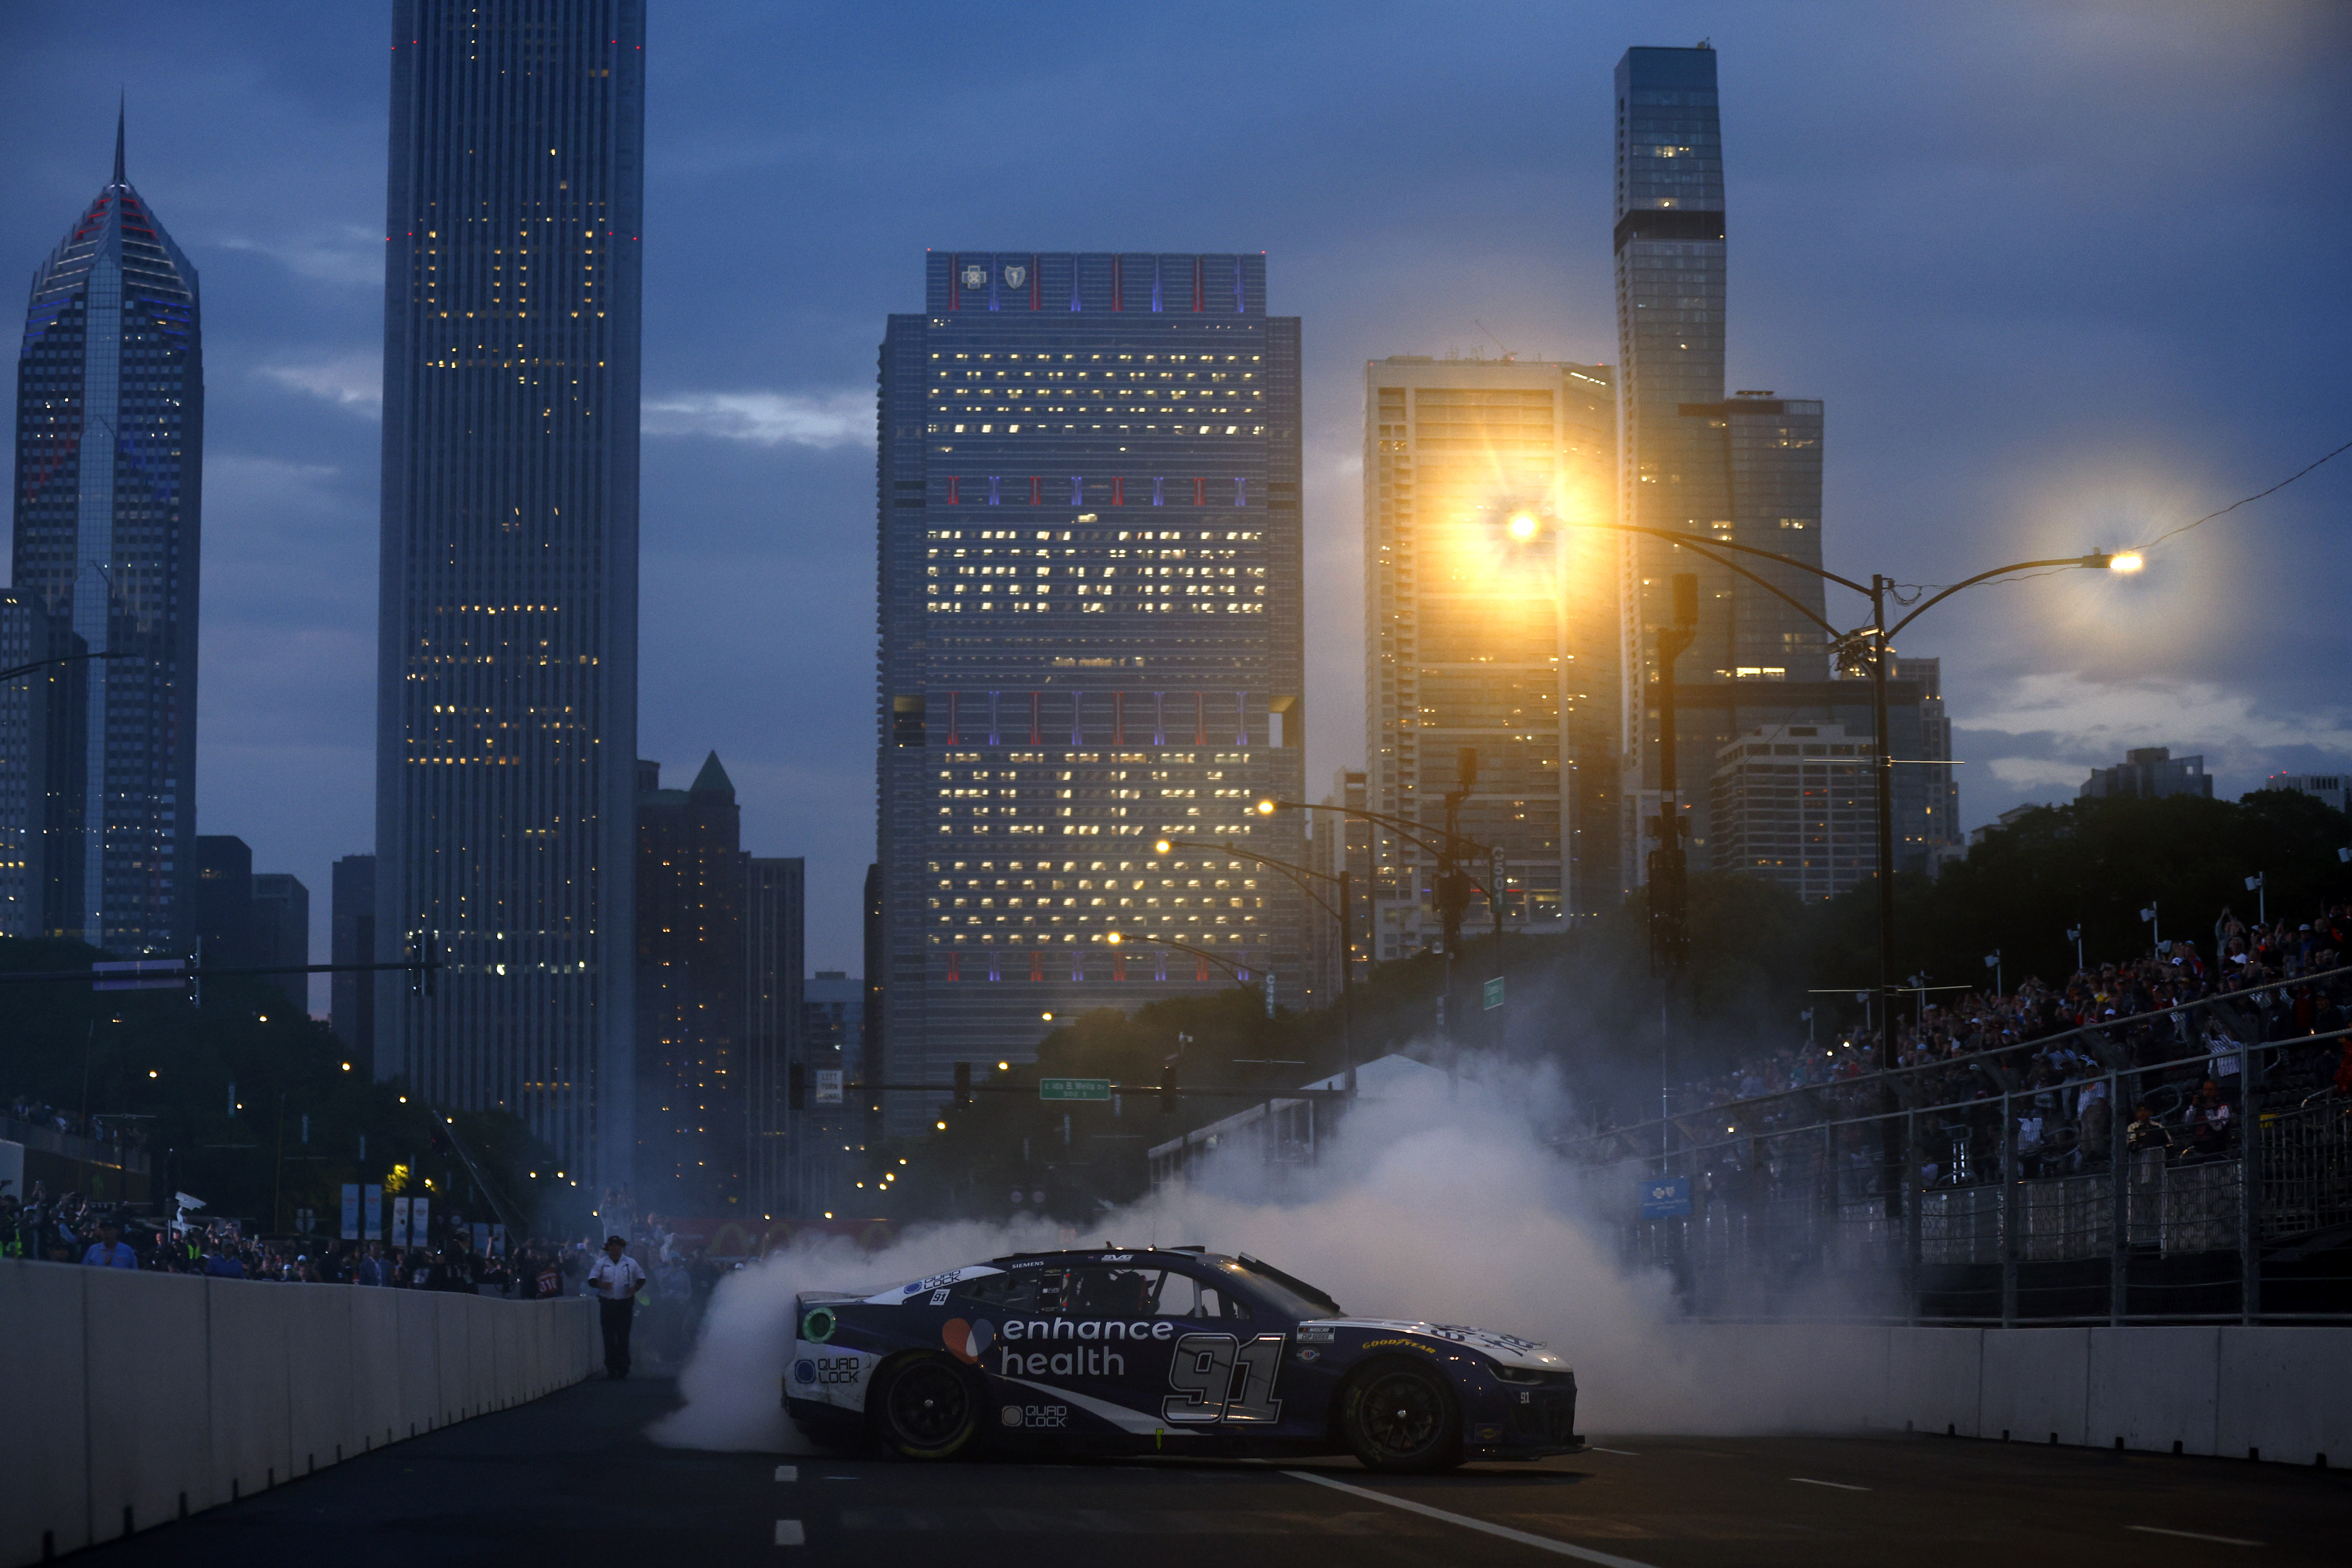 Shane Van Gisbergen, driver of the #91 Enhance Health Chevrolet, celebrates with a burnout after winning the NASCAR Cup Series Grant Park 220 at the Chicago Street Course on July 02, 2023 in Chicago, Illinois. (Photo by Jared C. Tilton/Getty Images)